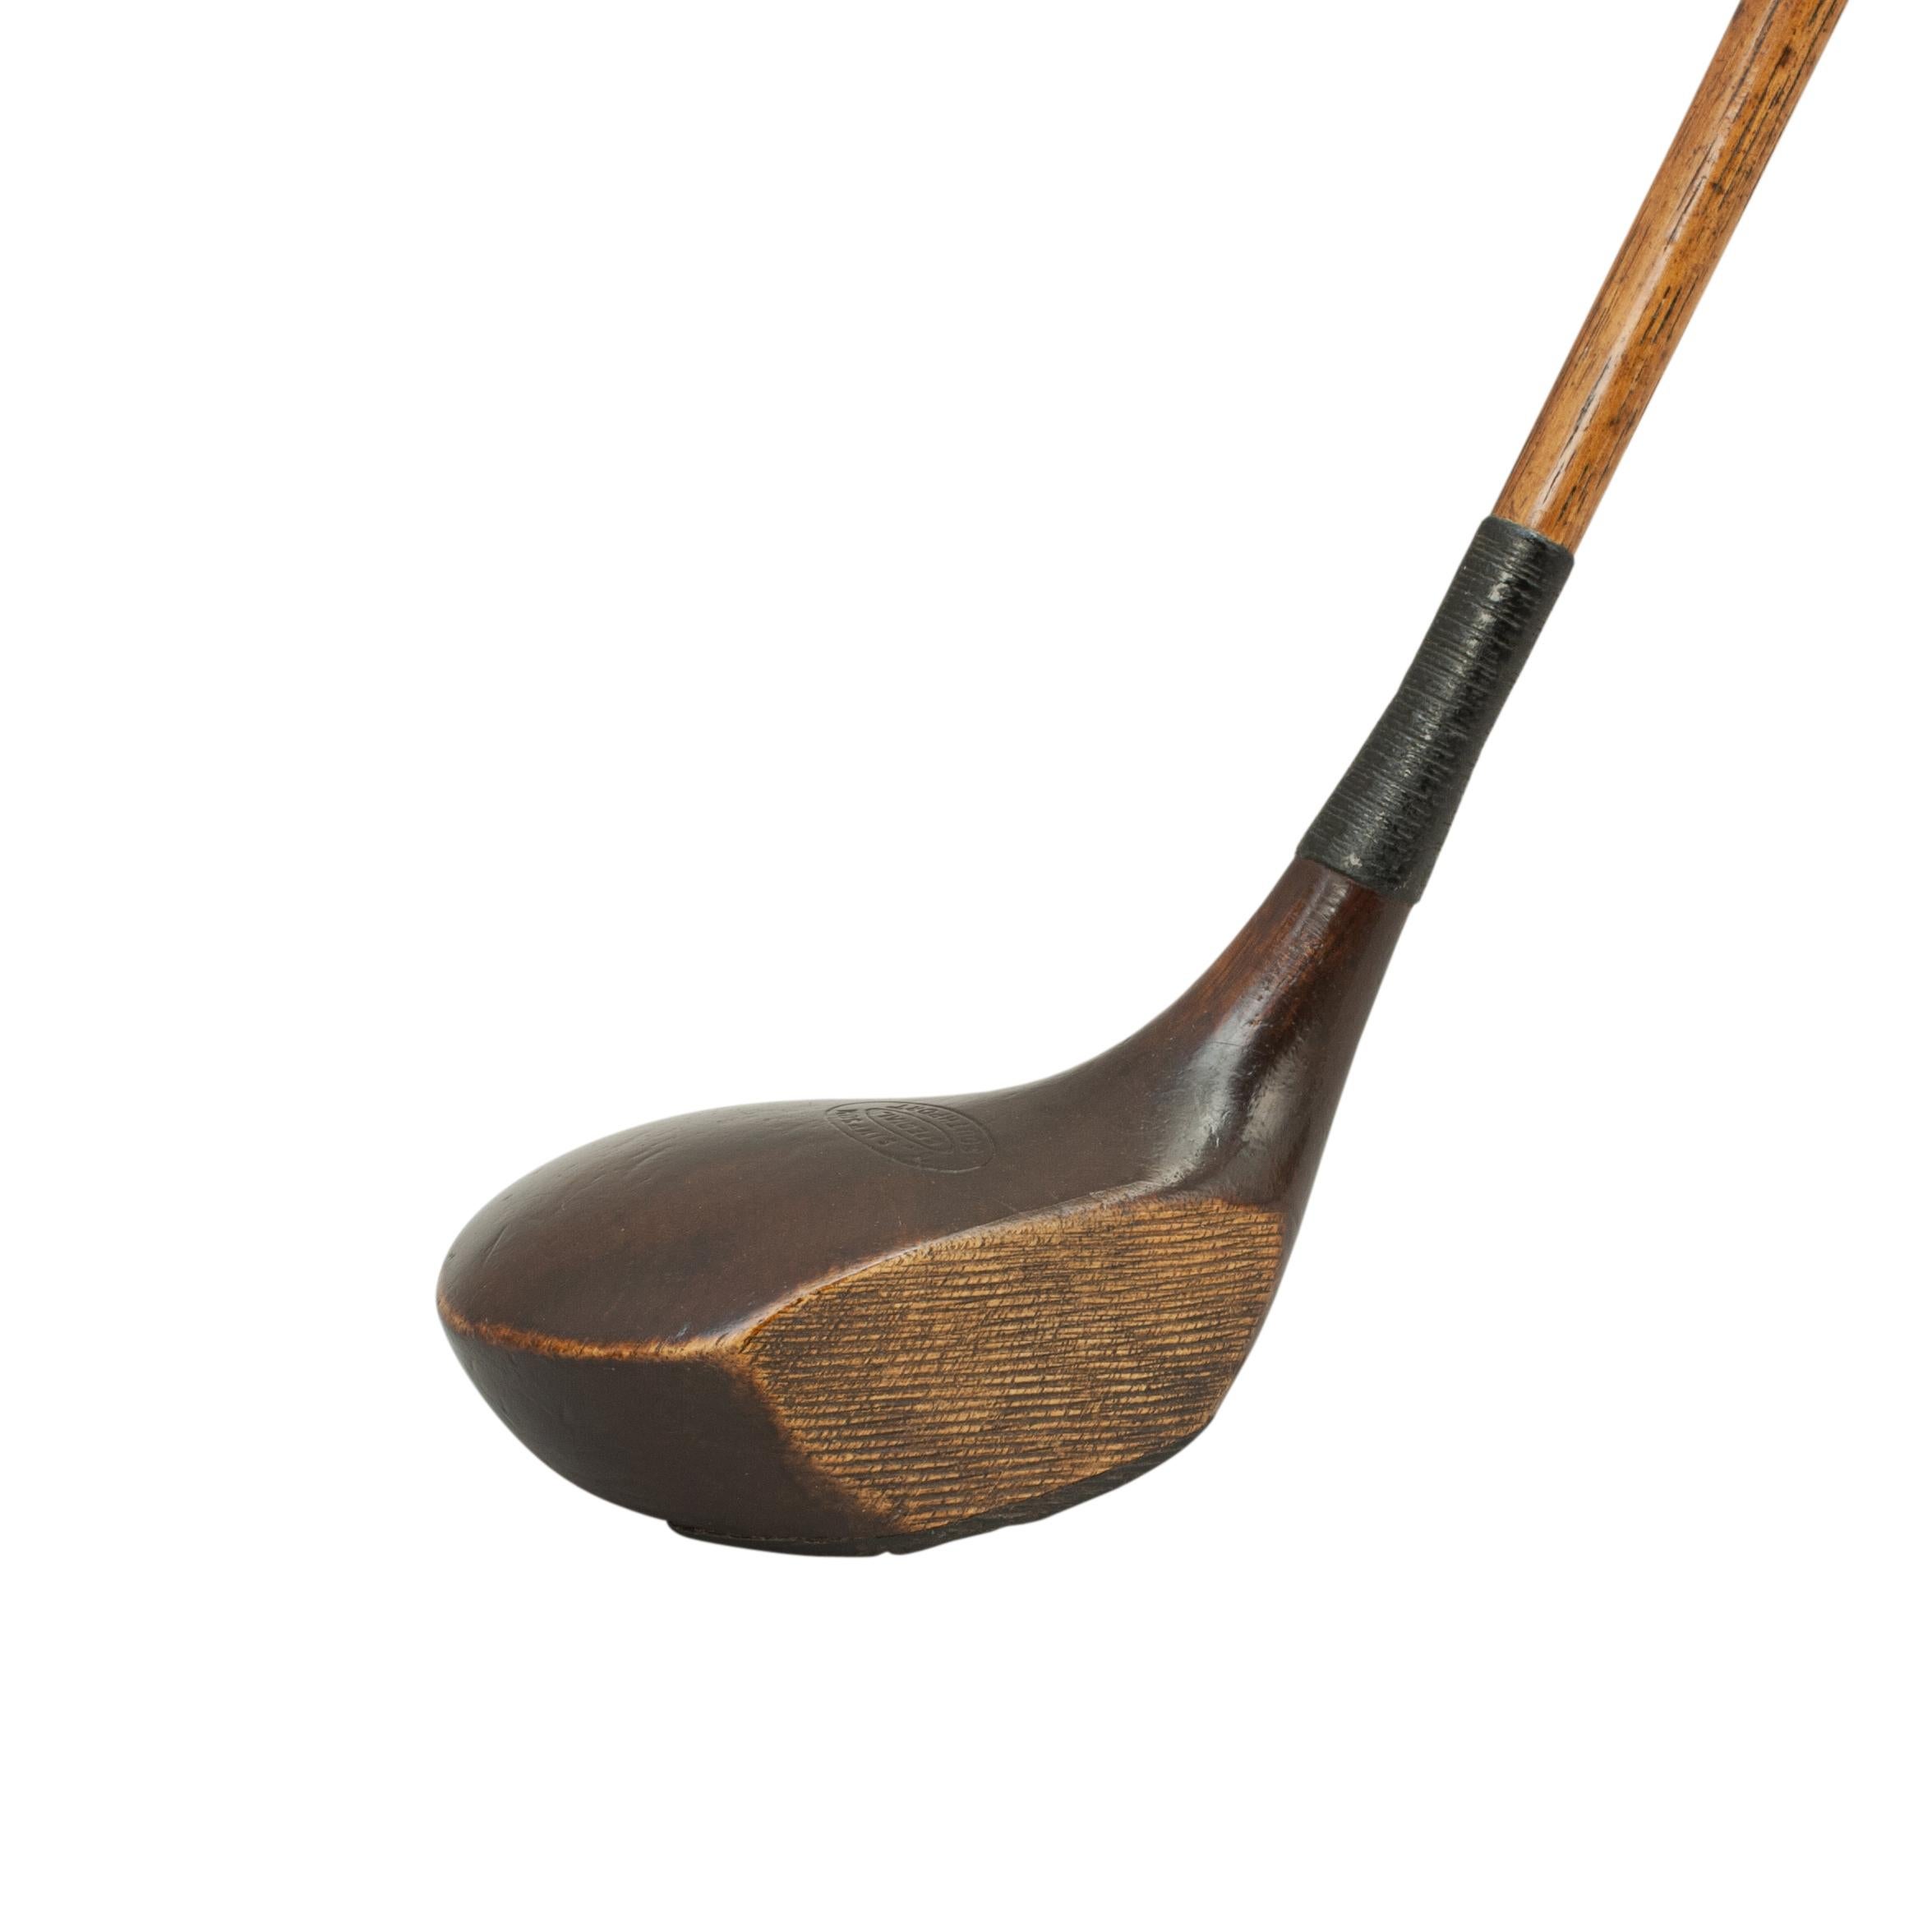 Antique golf club, hickory driver by T. Simpson.
A good original persimmon wood socket head brassie with hickory shaft and new leather grip. The head marked 'T. Simpson, Special, Southport'. The club head has a leading edge horn insert and lead